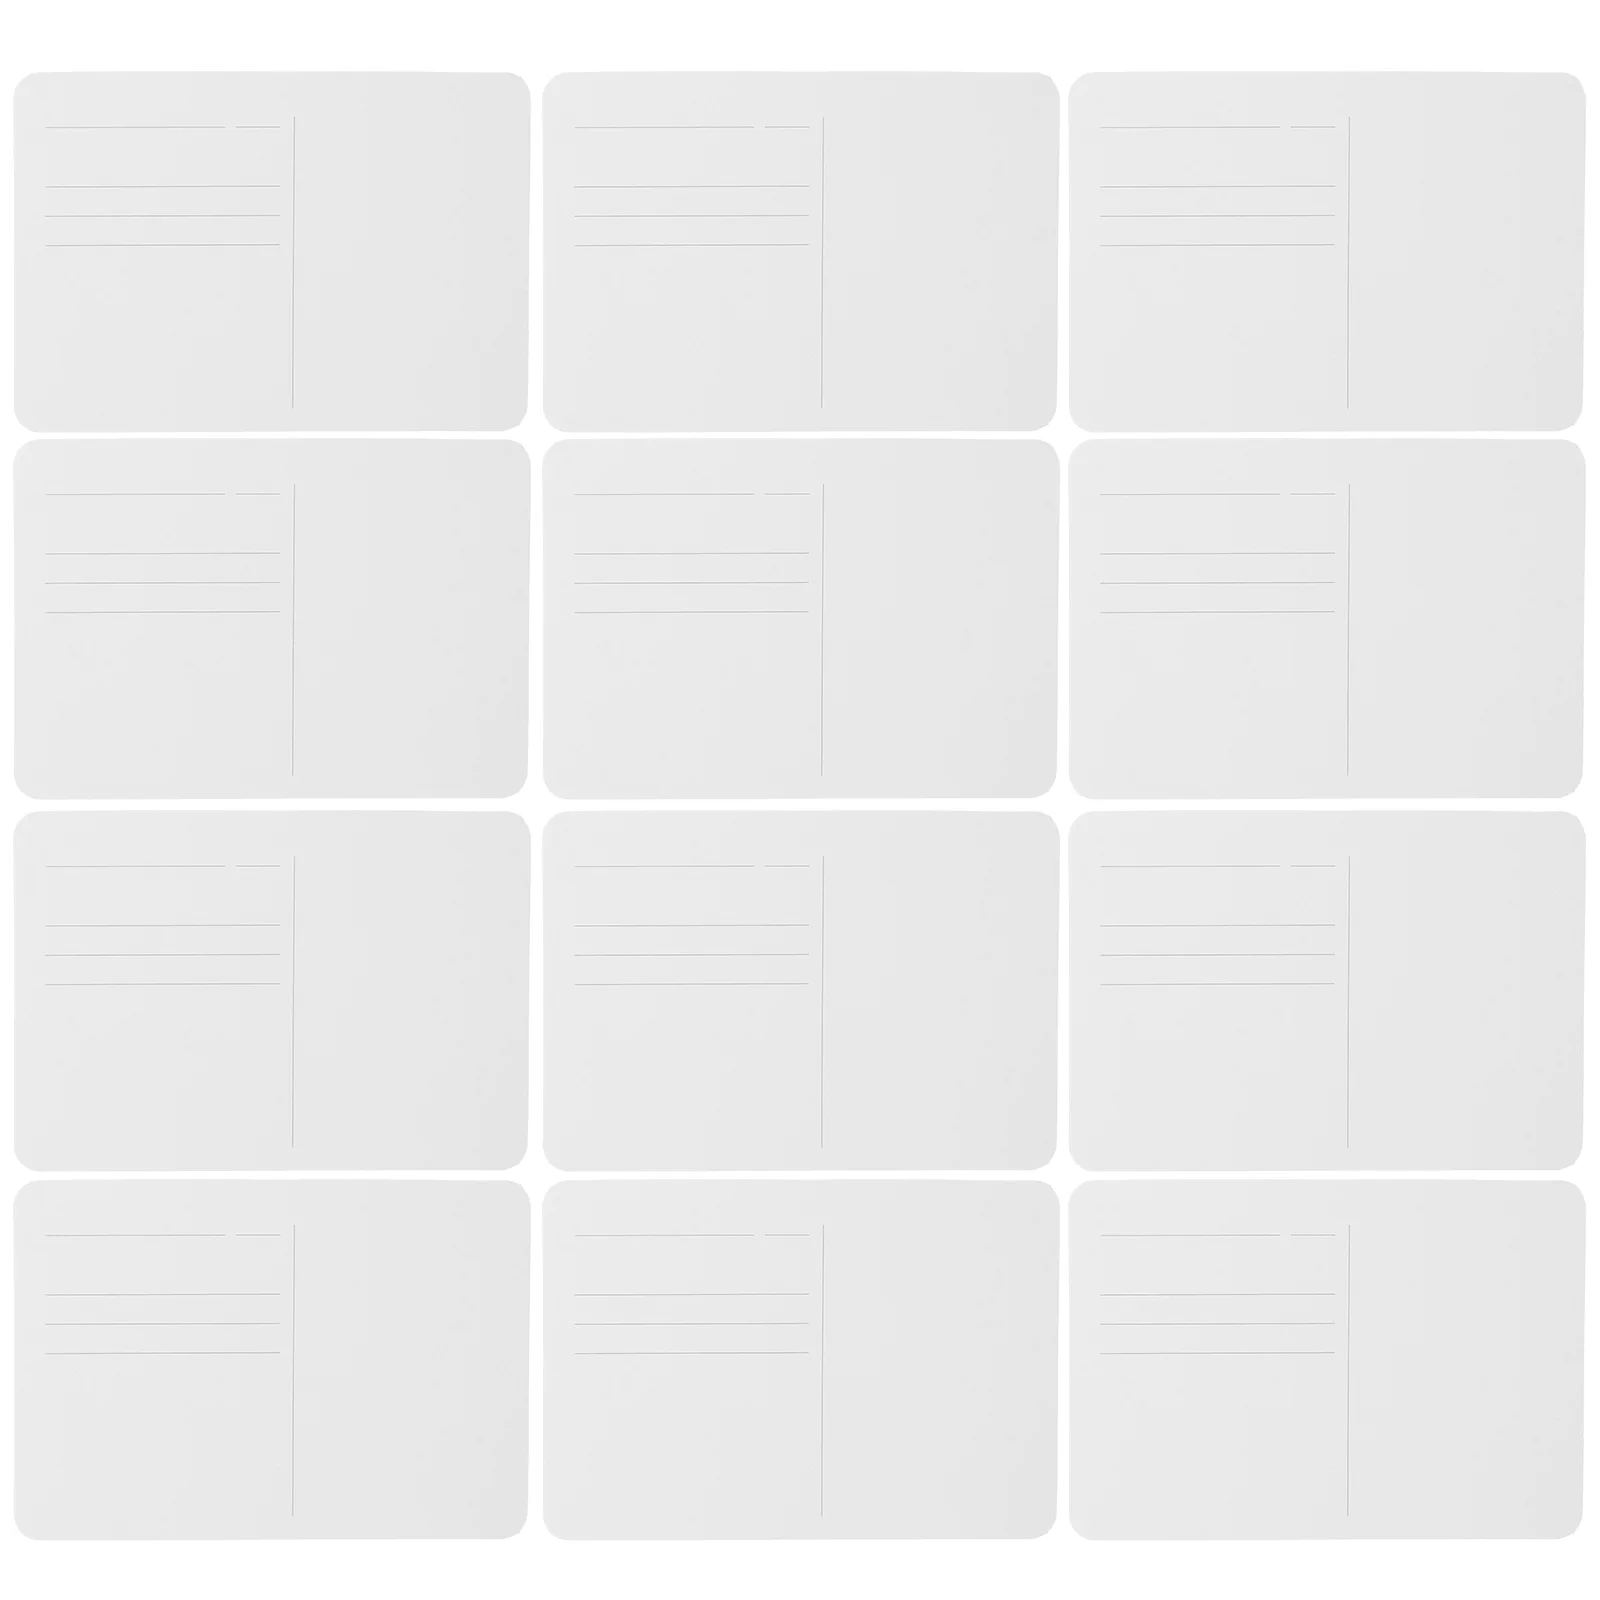 

12 Pcs Watercolor Paper Greeting Card Gift Cards Memo Round Multi-function Blank Message Supplies for Present